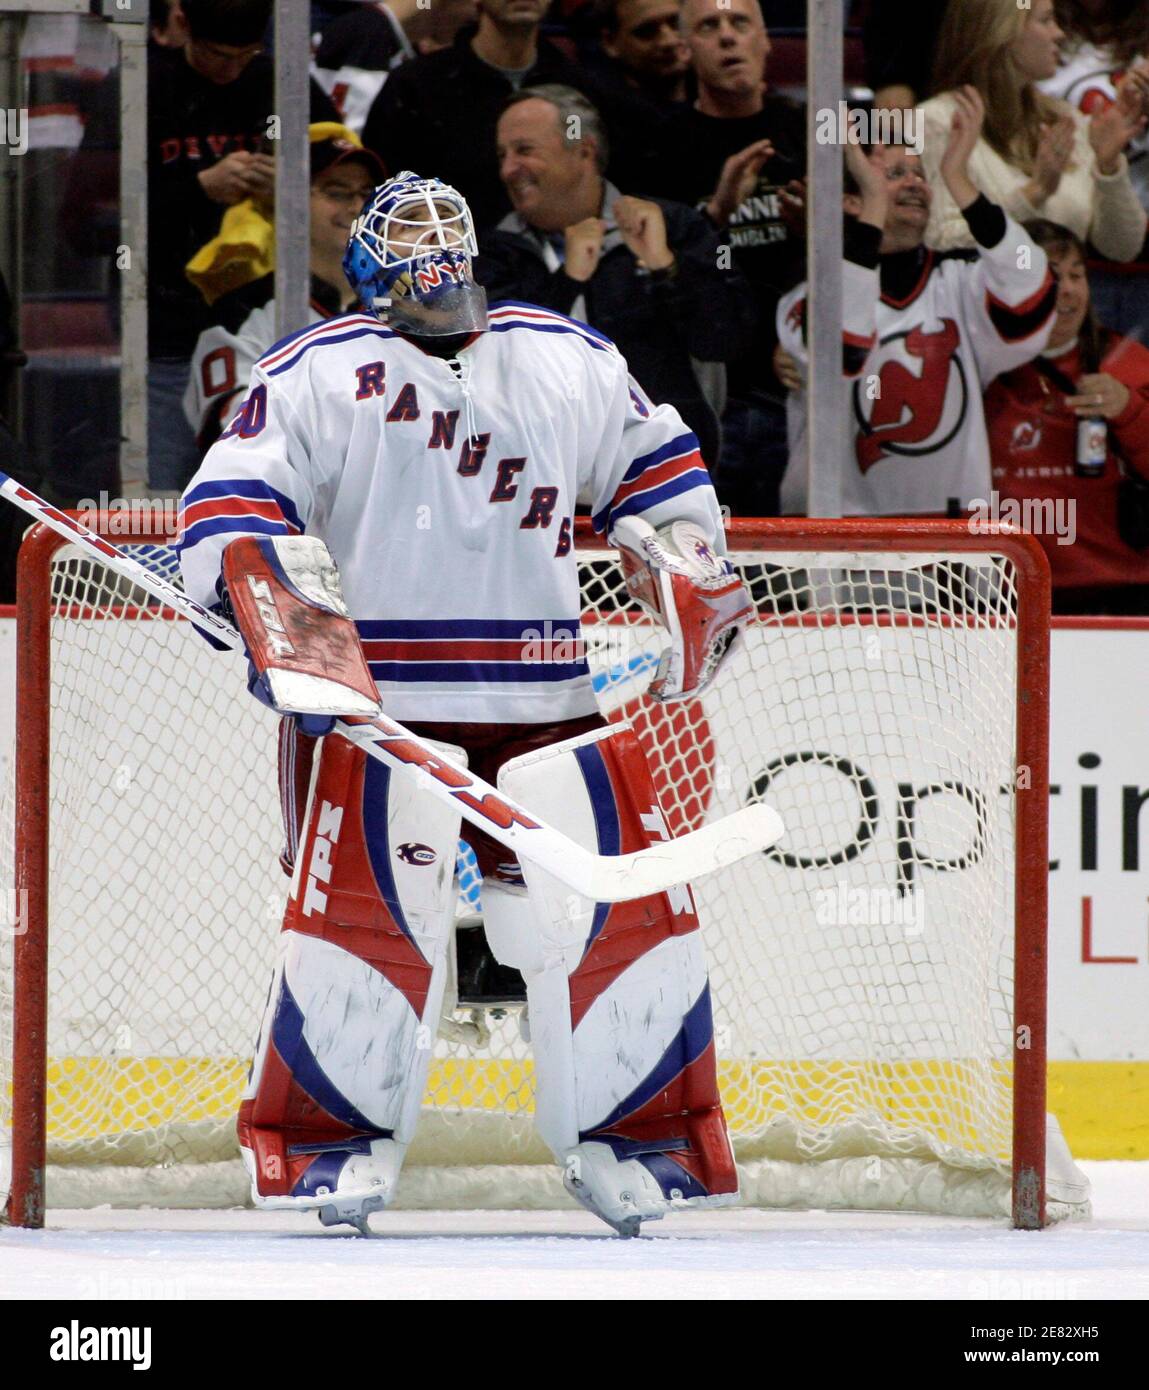 New York Rangers rookie goalie Henrik Lundqvist looks up at the scorebard  as fans celebrate after New Jersey Devils Jamie Langenbrunner scored the  Devils fifth goal in the third period of Game